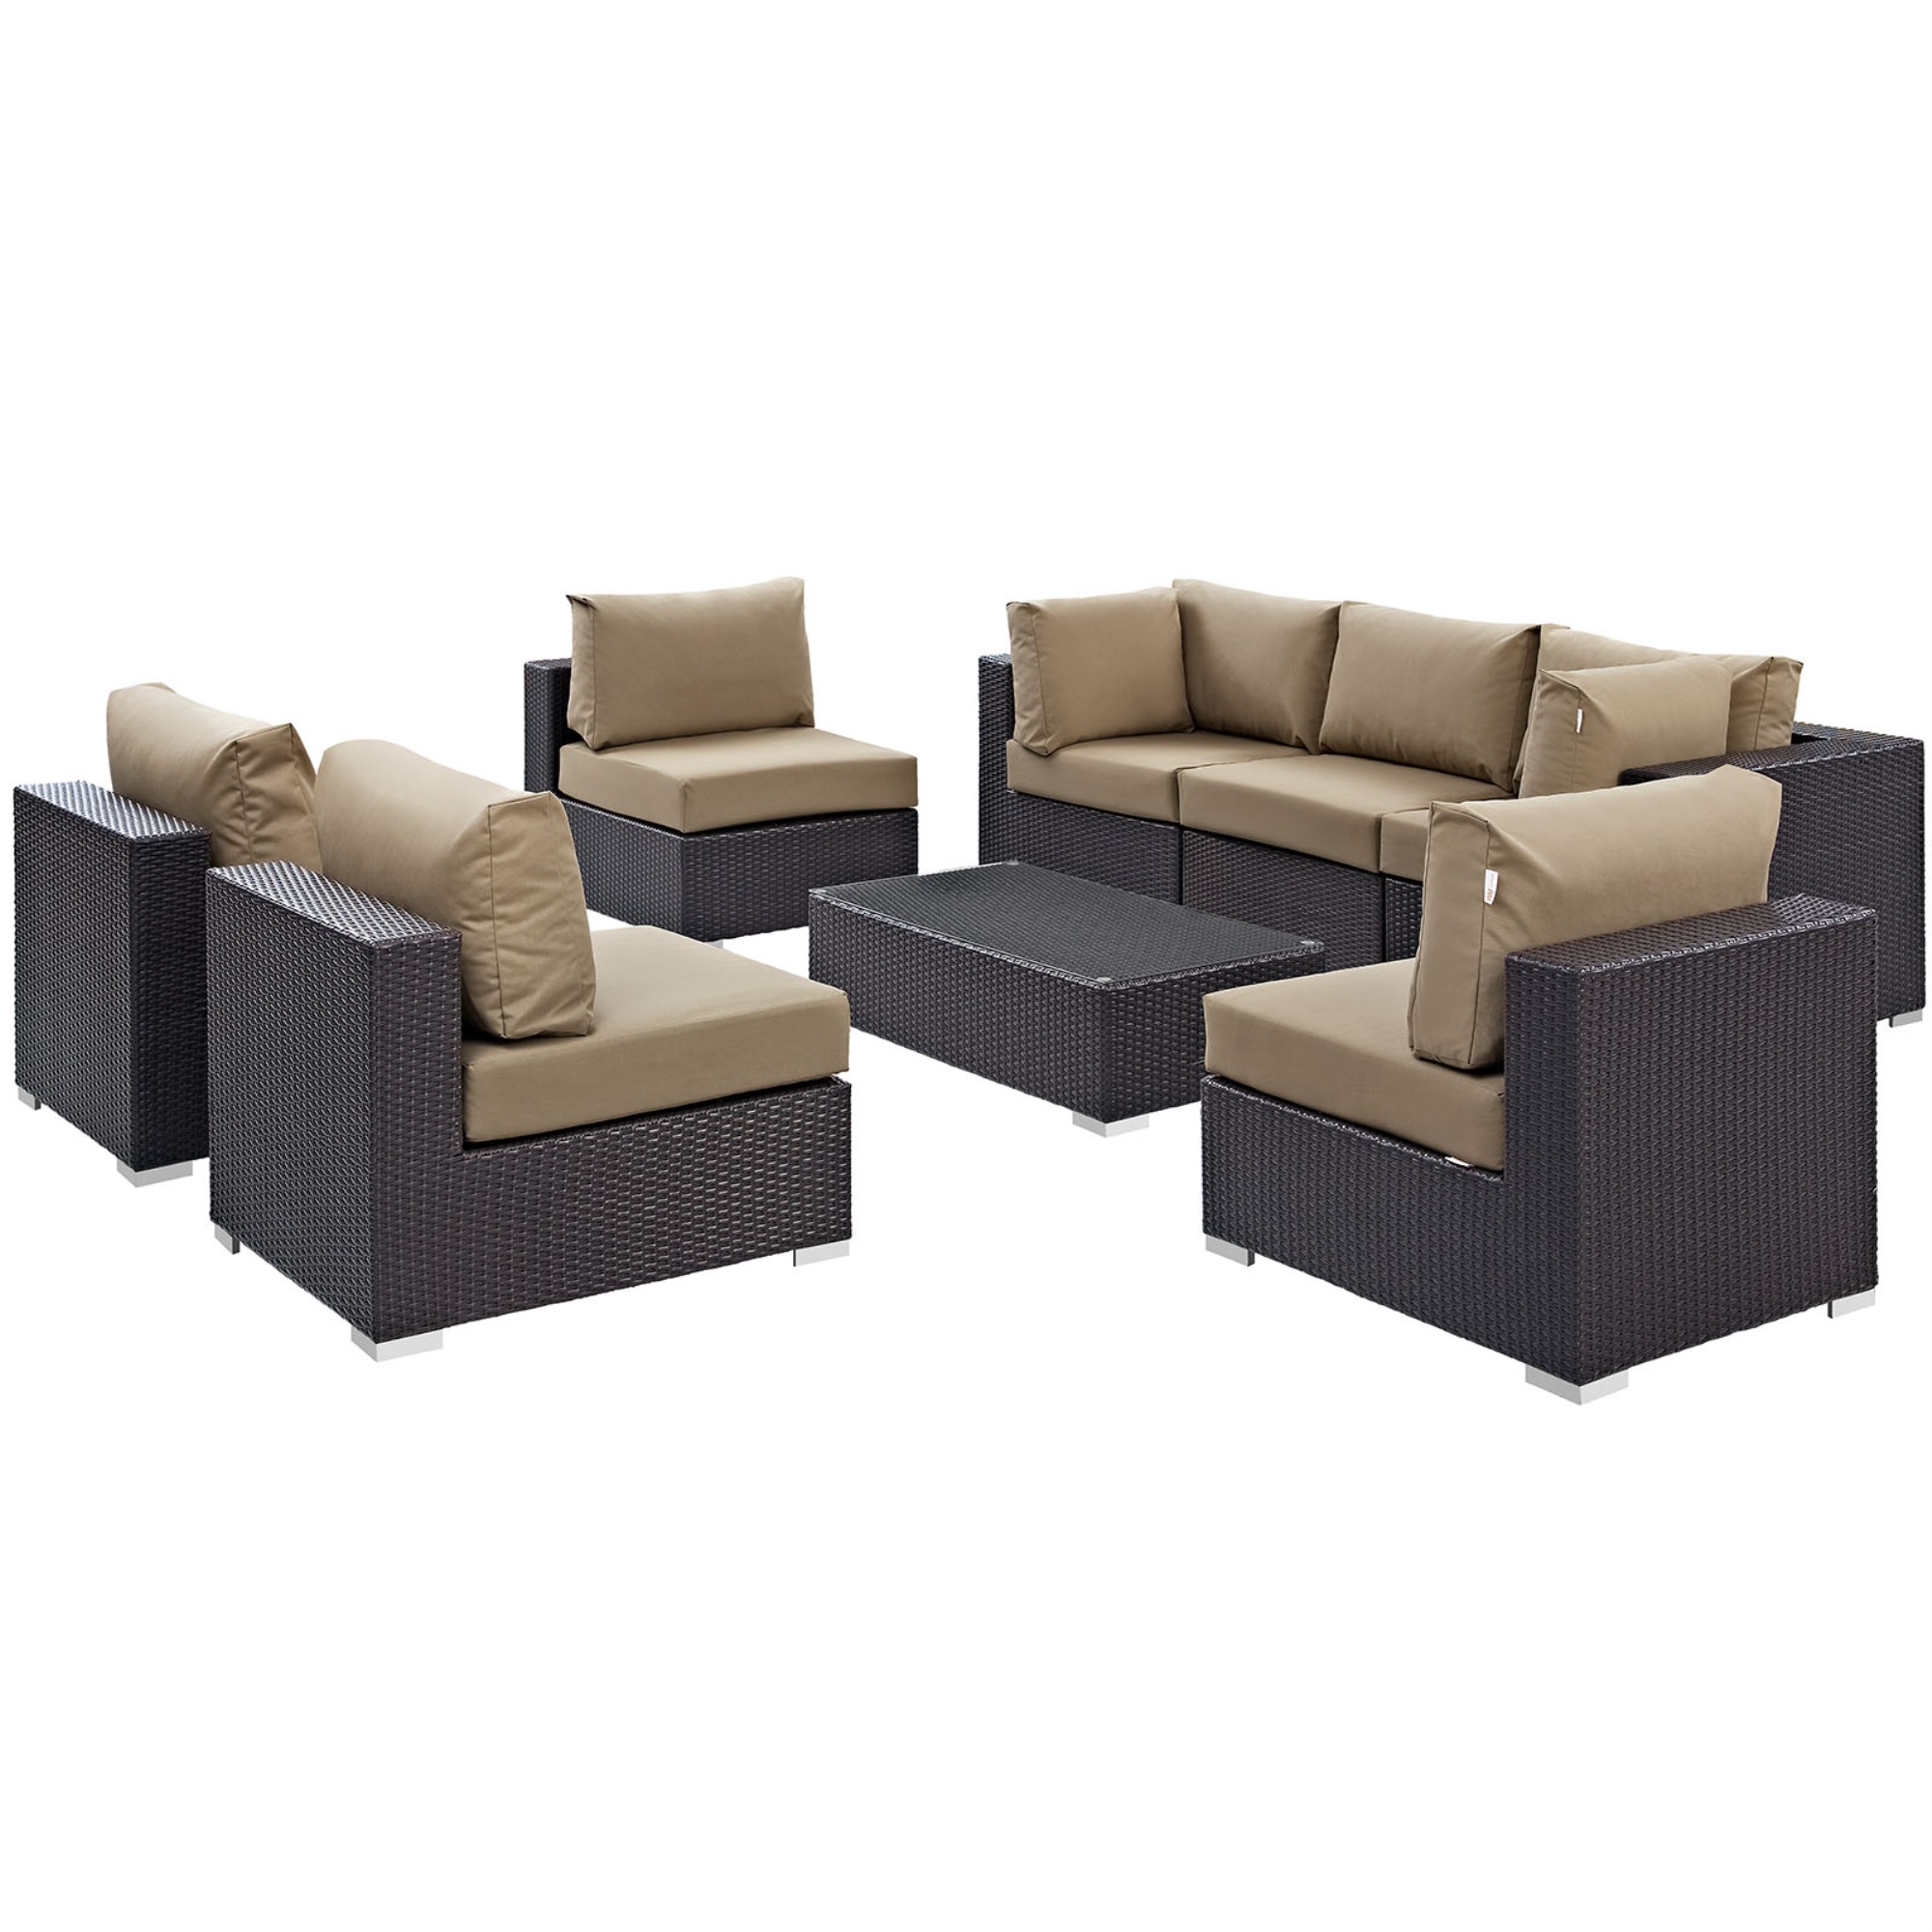 Ergode Convene Outdoor Sectional Set - Adjustable, Weather-Resistant, 8-Piece Patio Furniture with Armless Sections, Coffee Tab